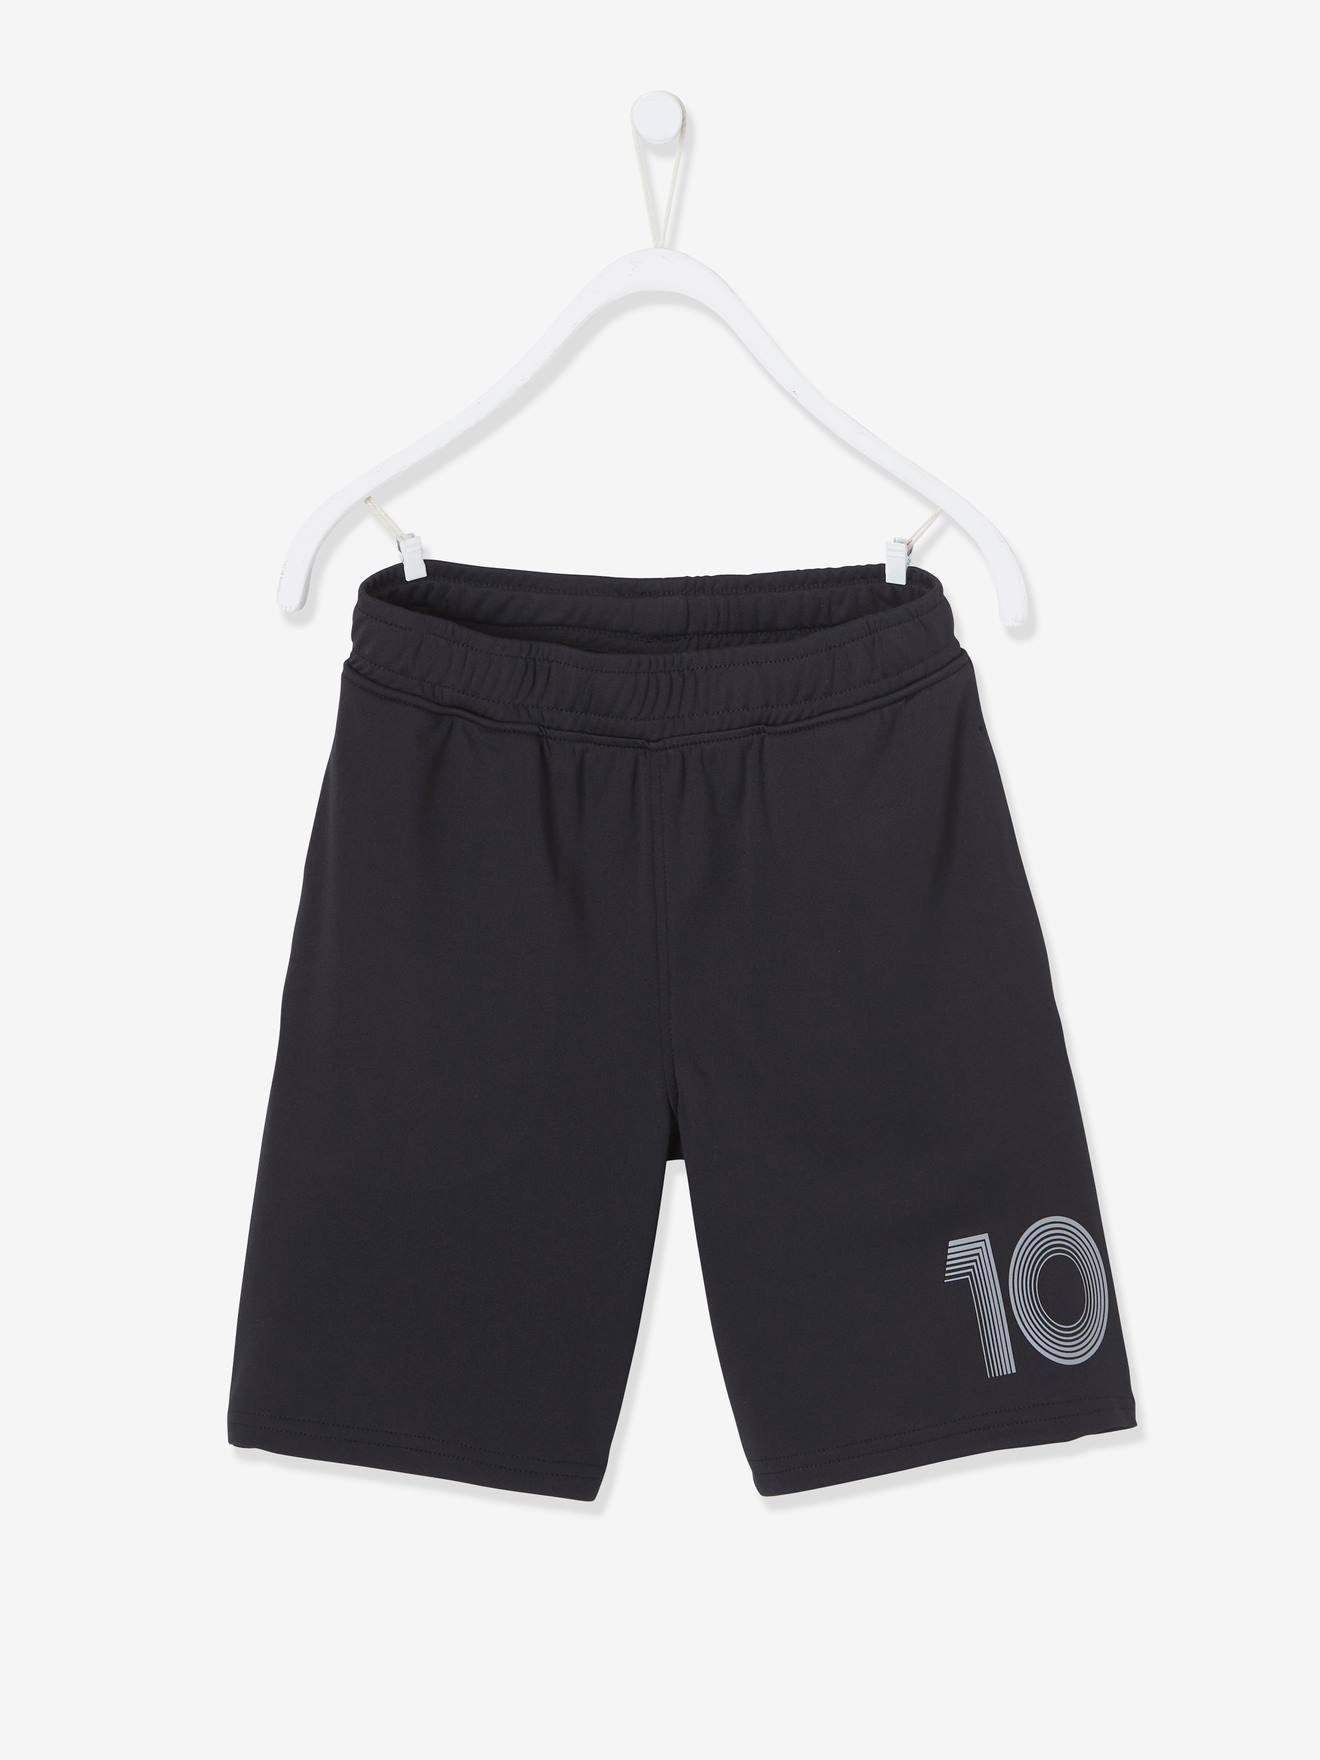 Number 10 Sports Shorts in Techno Material for Boys black